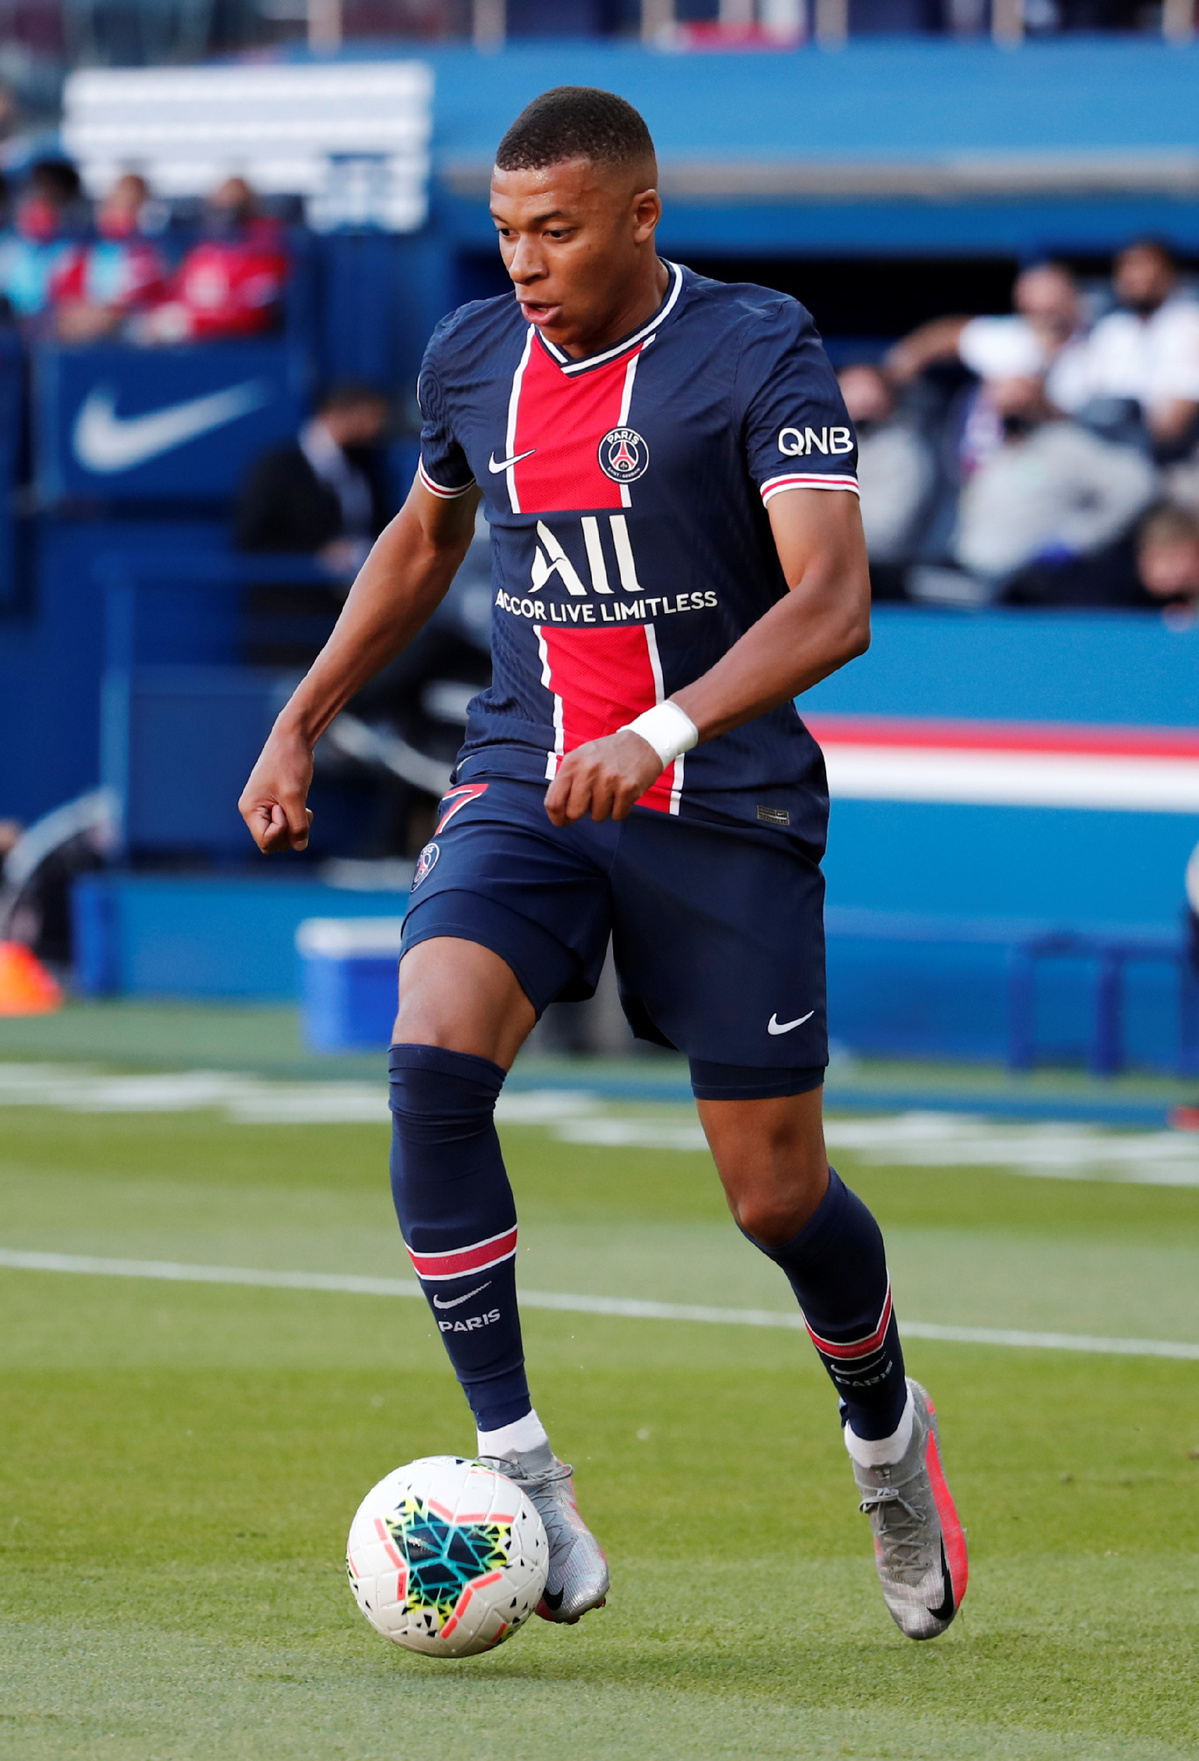 Mbappe to stay at PSG 'whatever happens' - China.org.cn